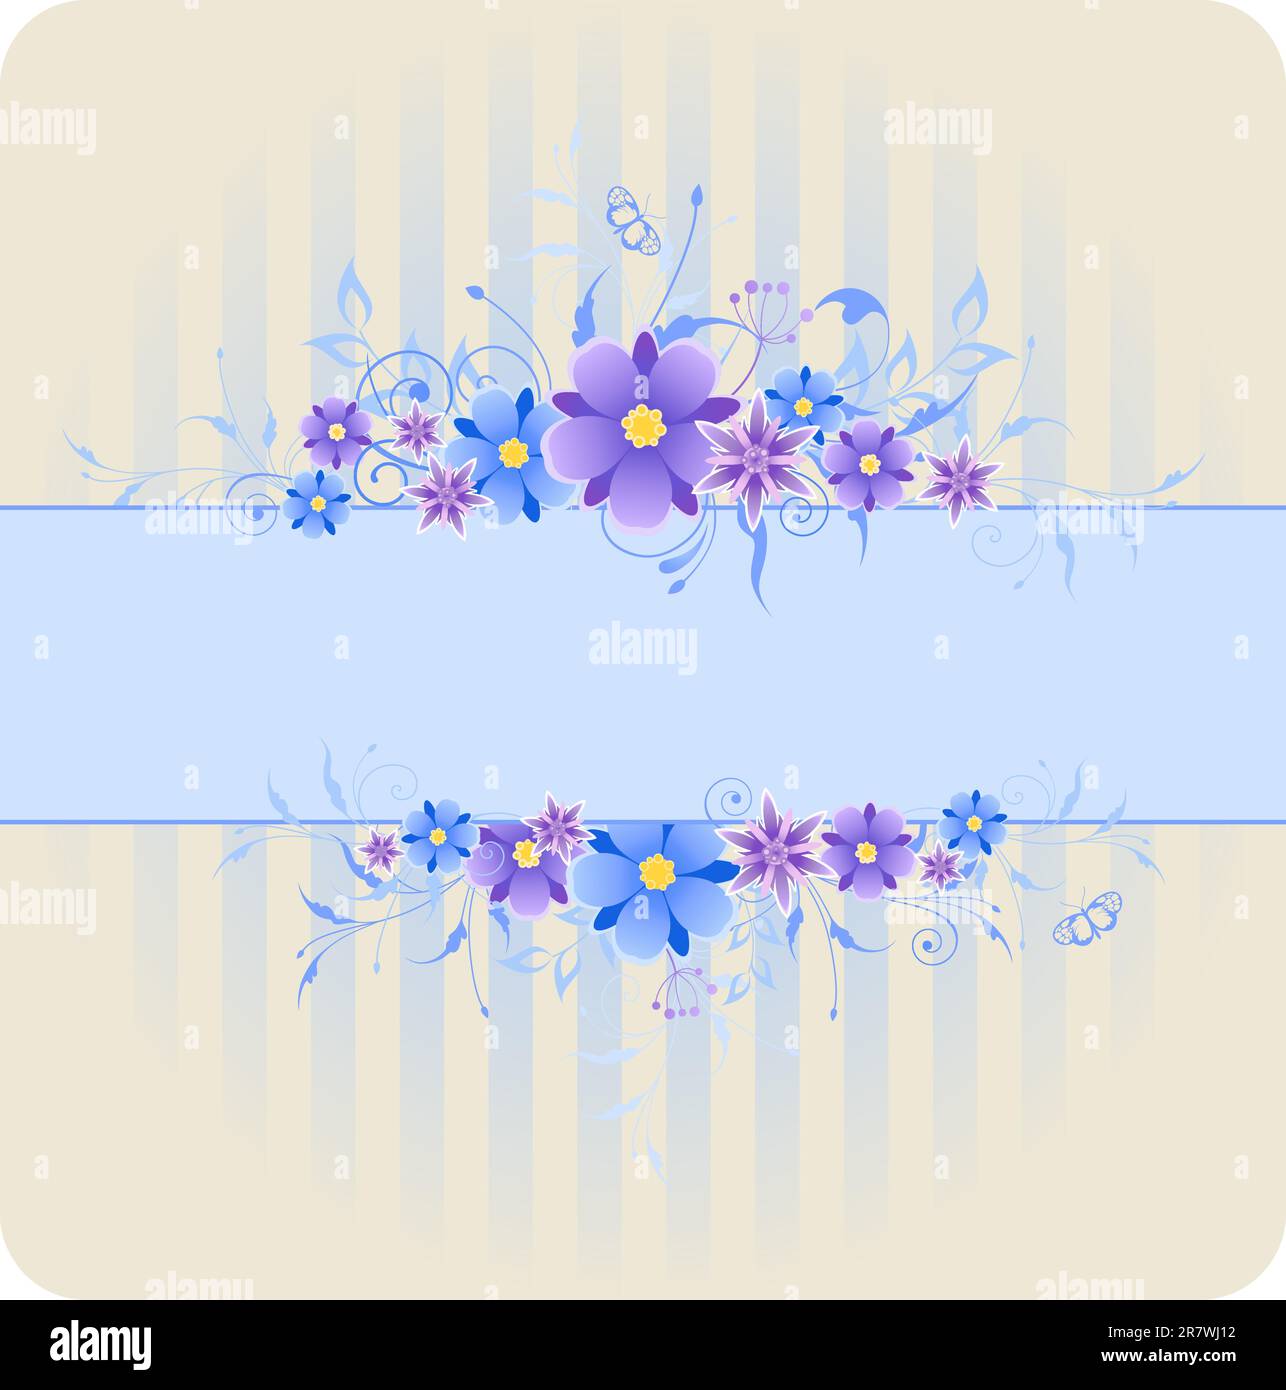 striped vector background with violet and blue flowers Stock Vector